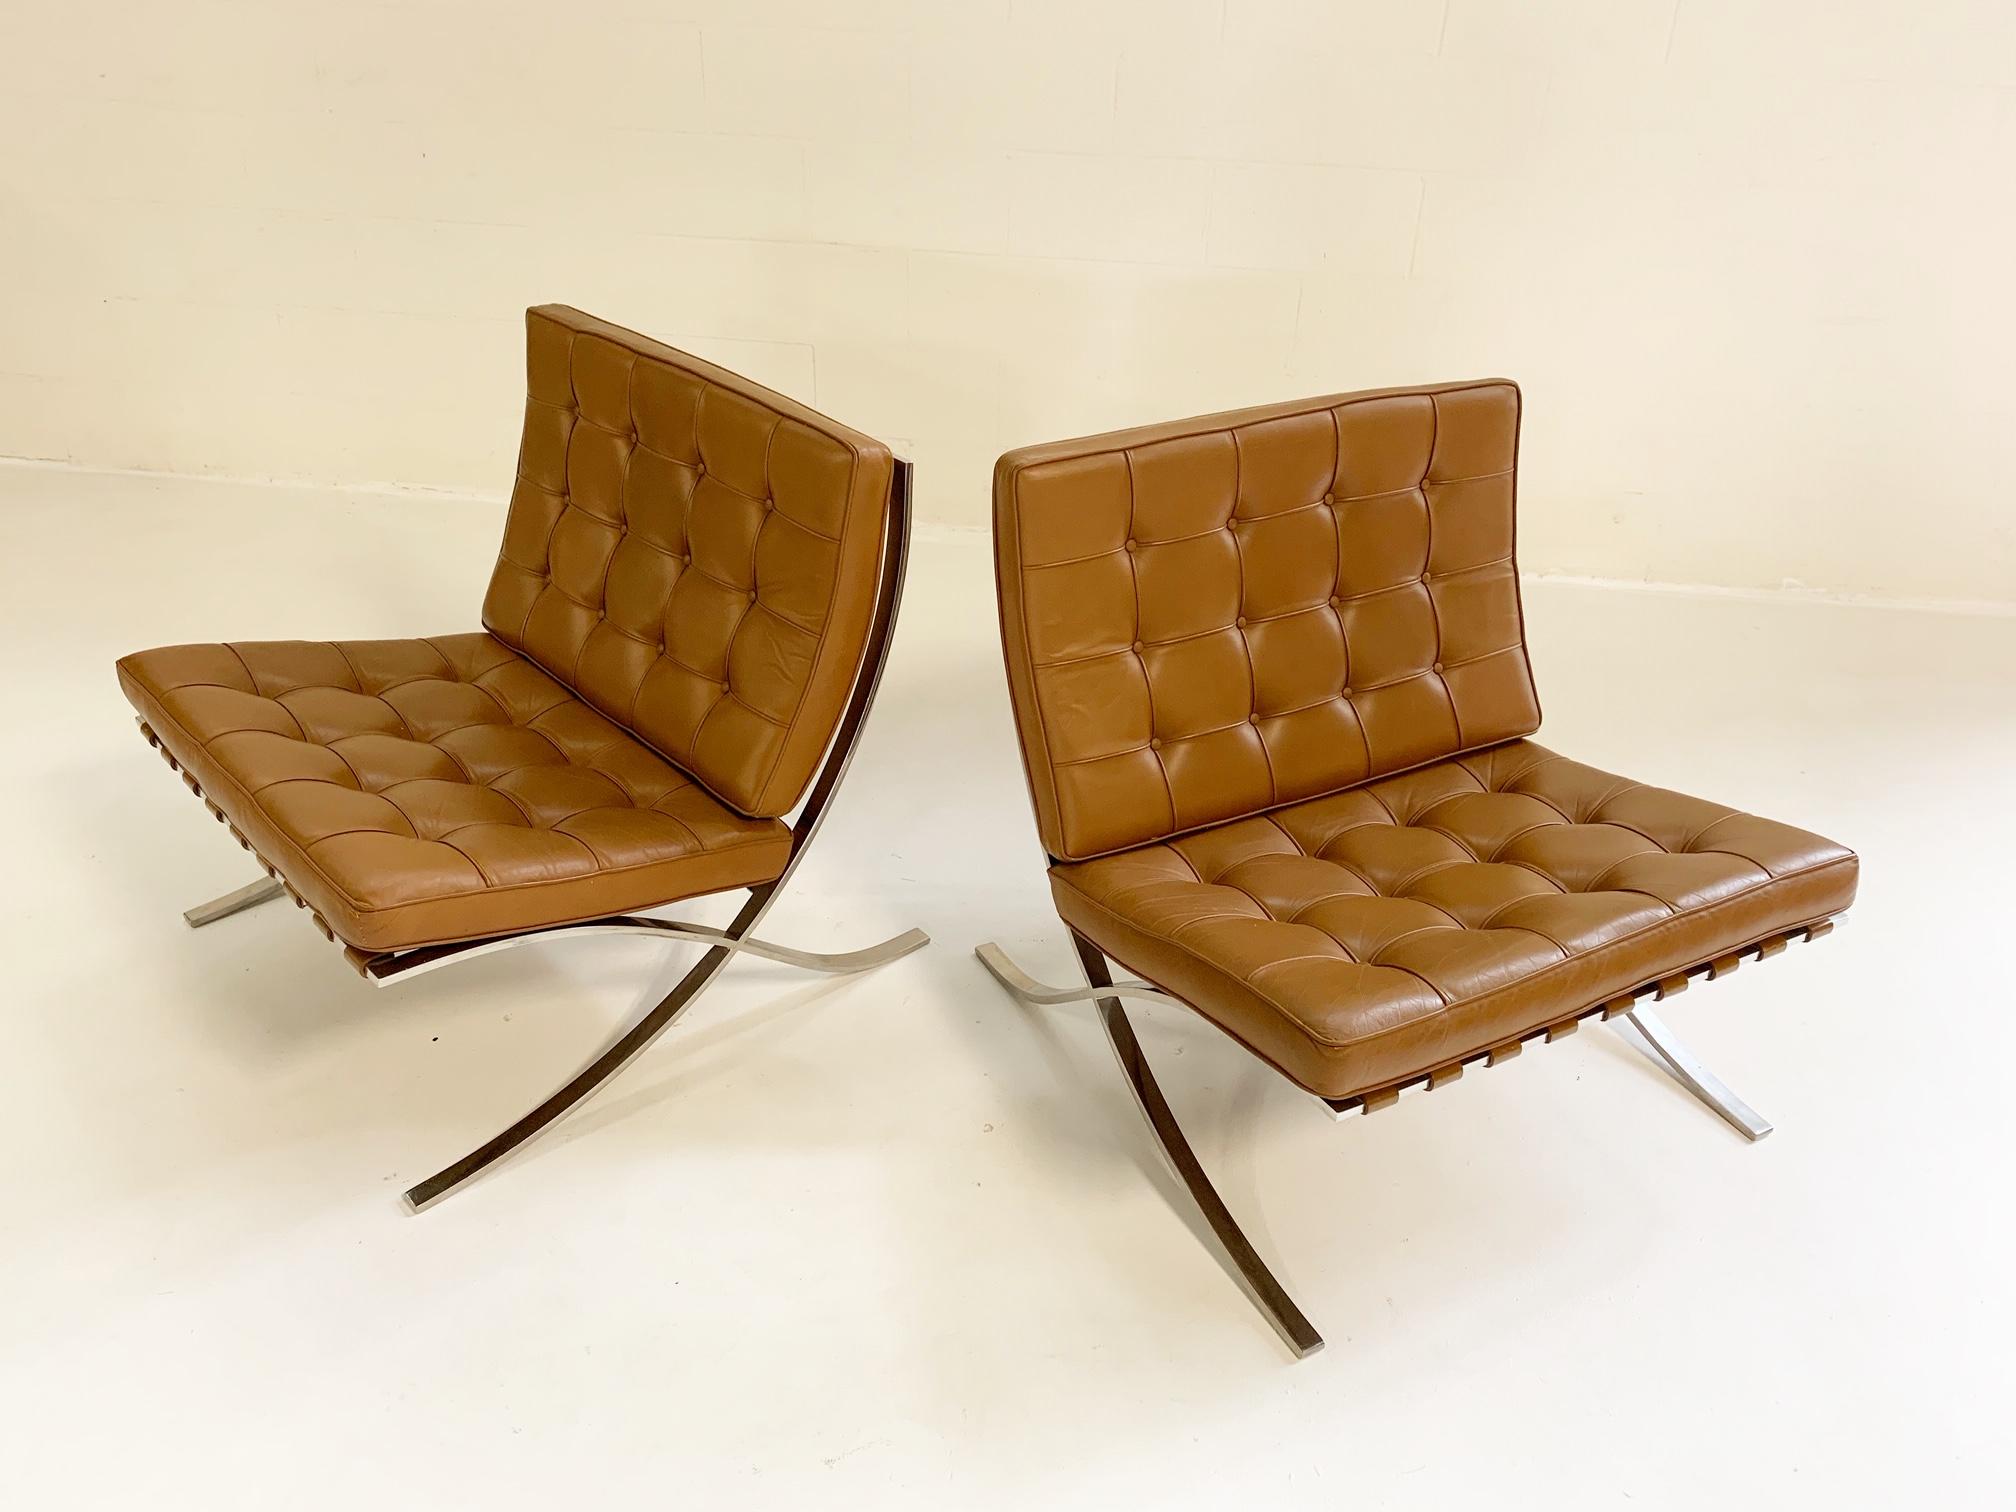 A collector's pair! These stunning pair of Barcelona chairs were made by Gerald R. Griffith under the close supervision of Mies van der Rohe. The Griffith chairs have extremely precise corners and less reinforcement at the central cross than later